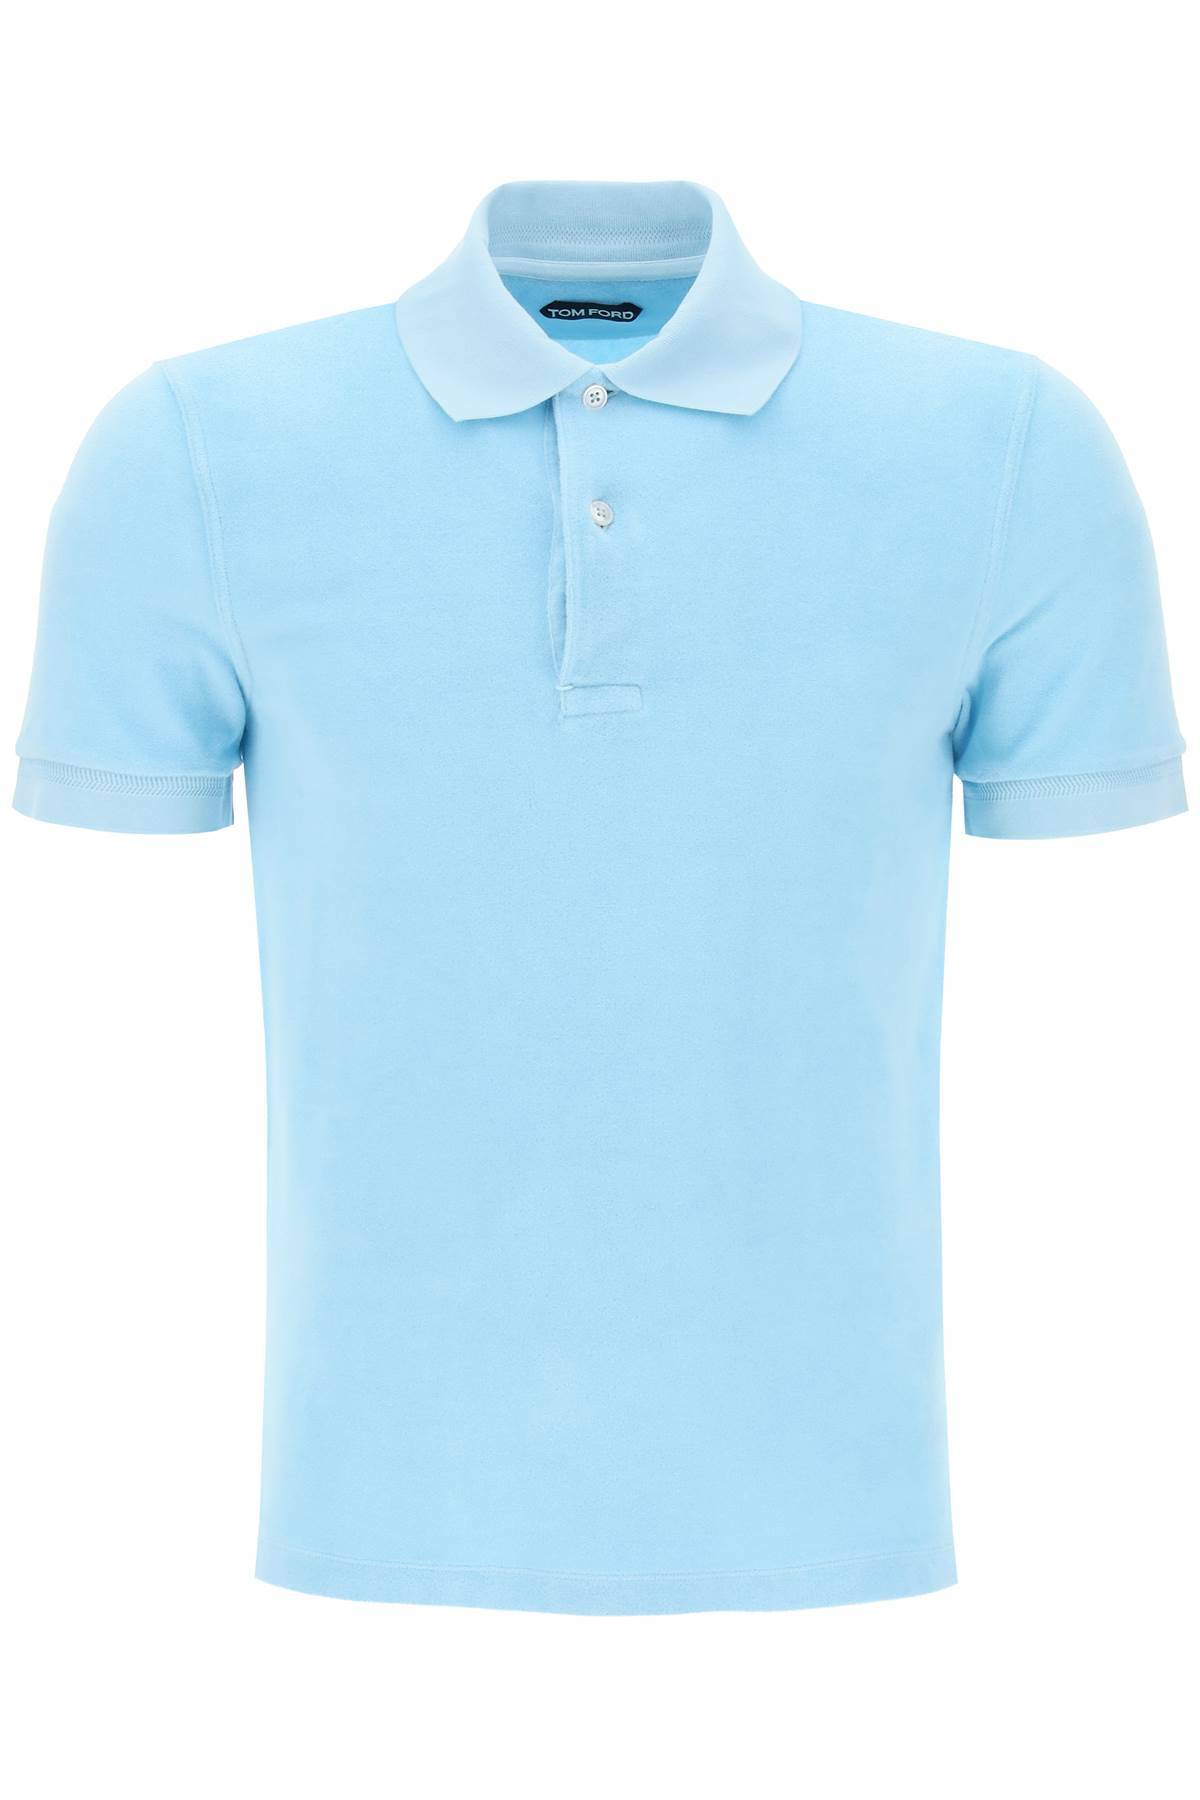 Tom Ford TOM FORD lightweight terry cloth polo